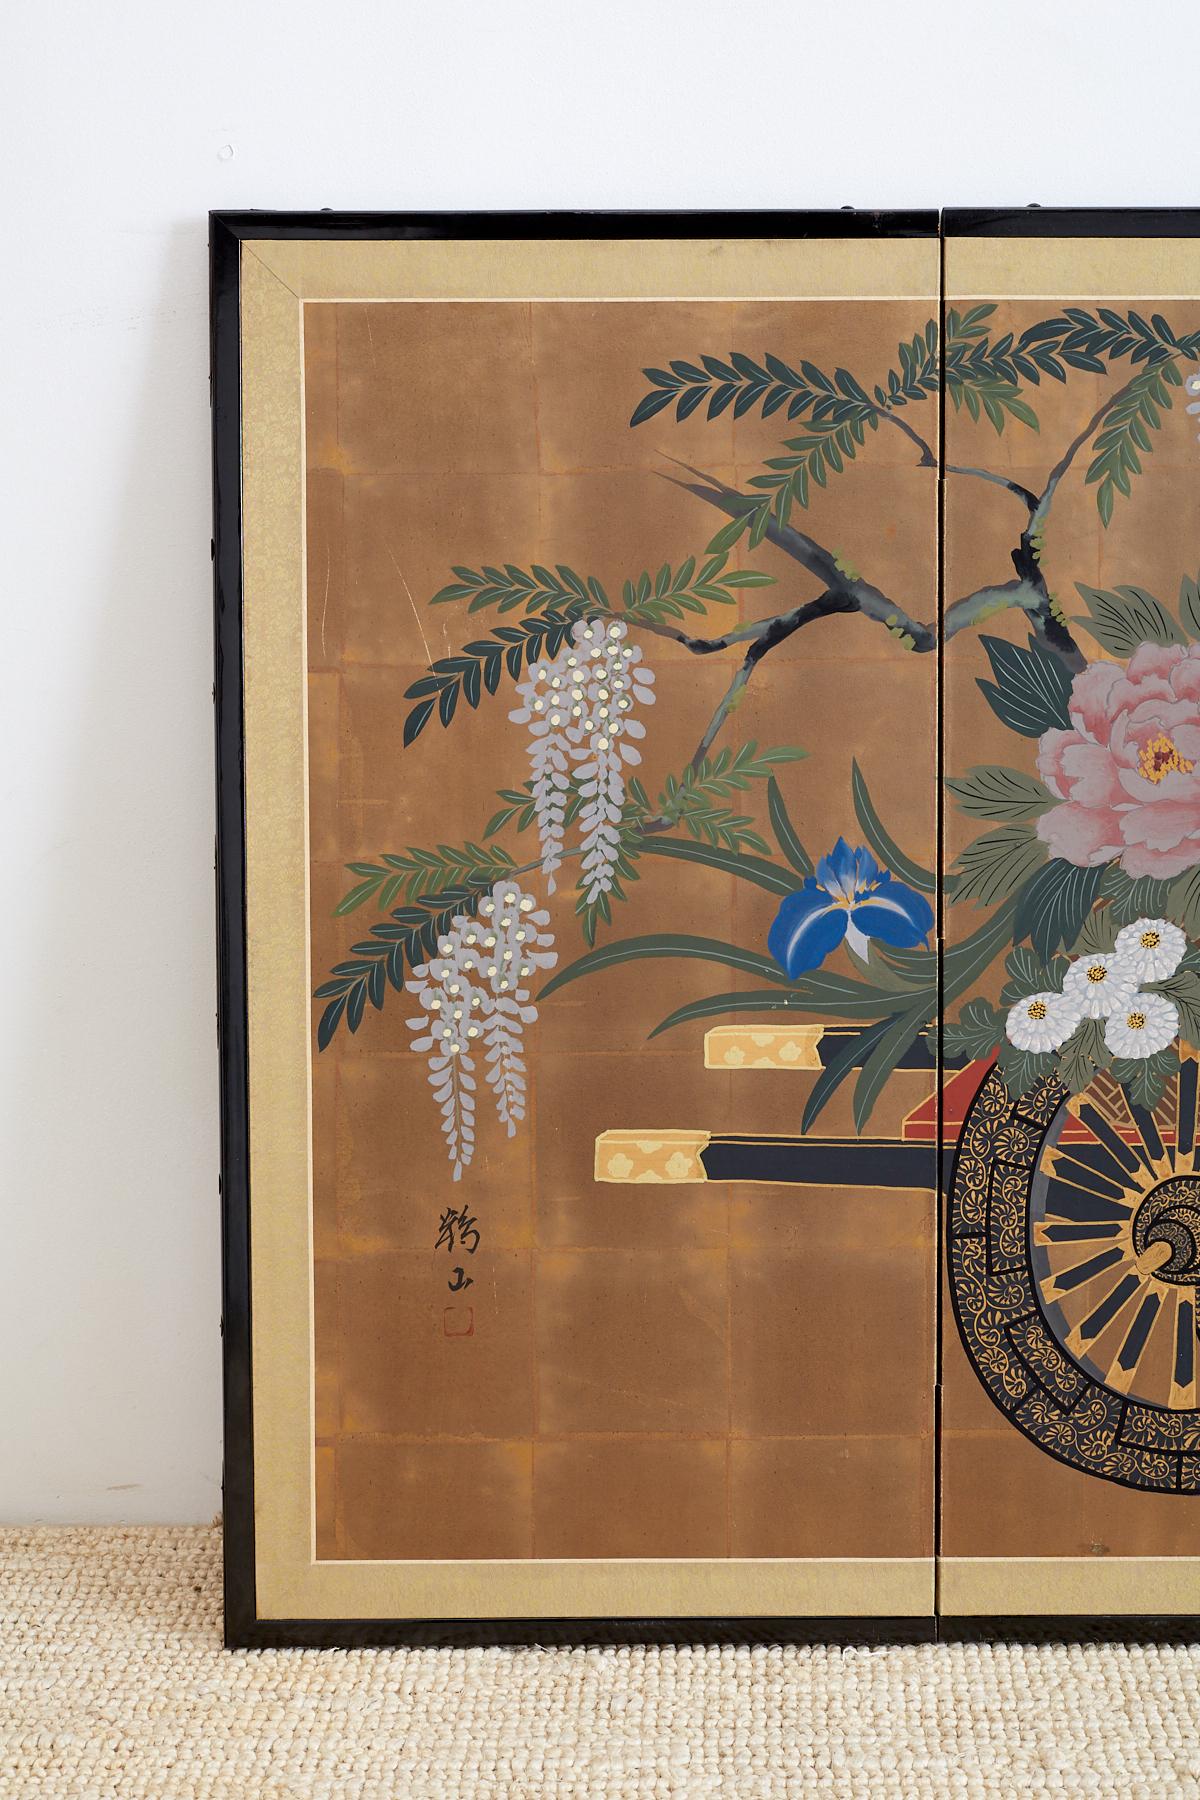 Lovely Japanese four-panel Byobu screen featuring a vibrant and colorful flower cart painted on squares of gold leaf with beautiful pink peonies, wisteria, white chrysanthemums, and little birds. Set in an ebonized wood frame with a traditional